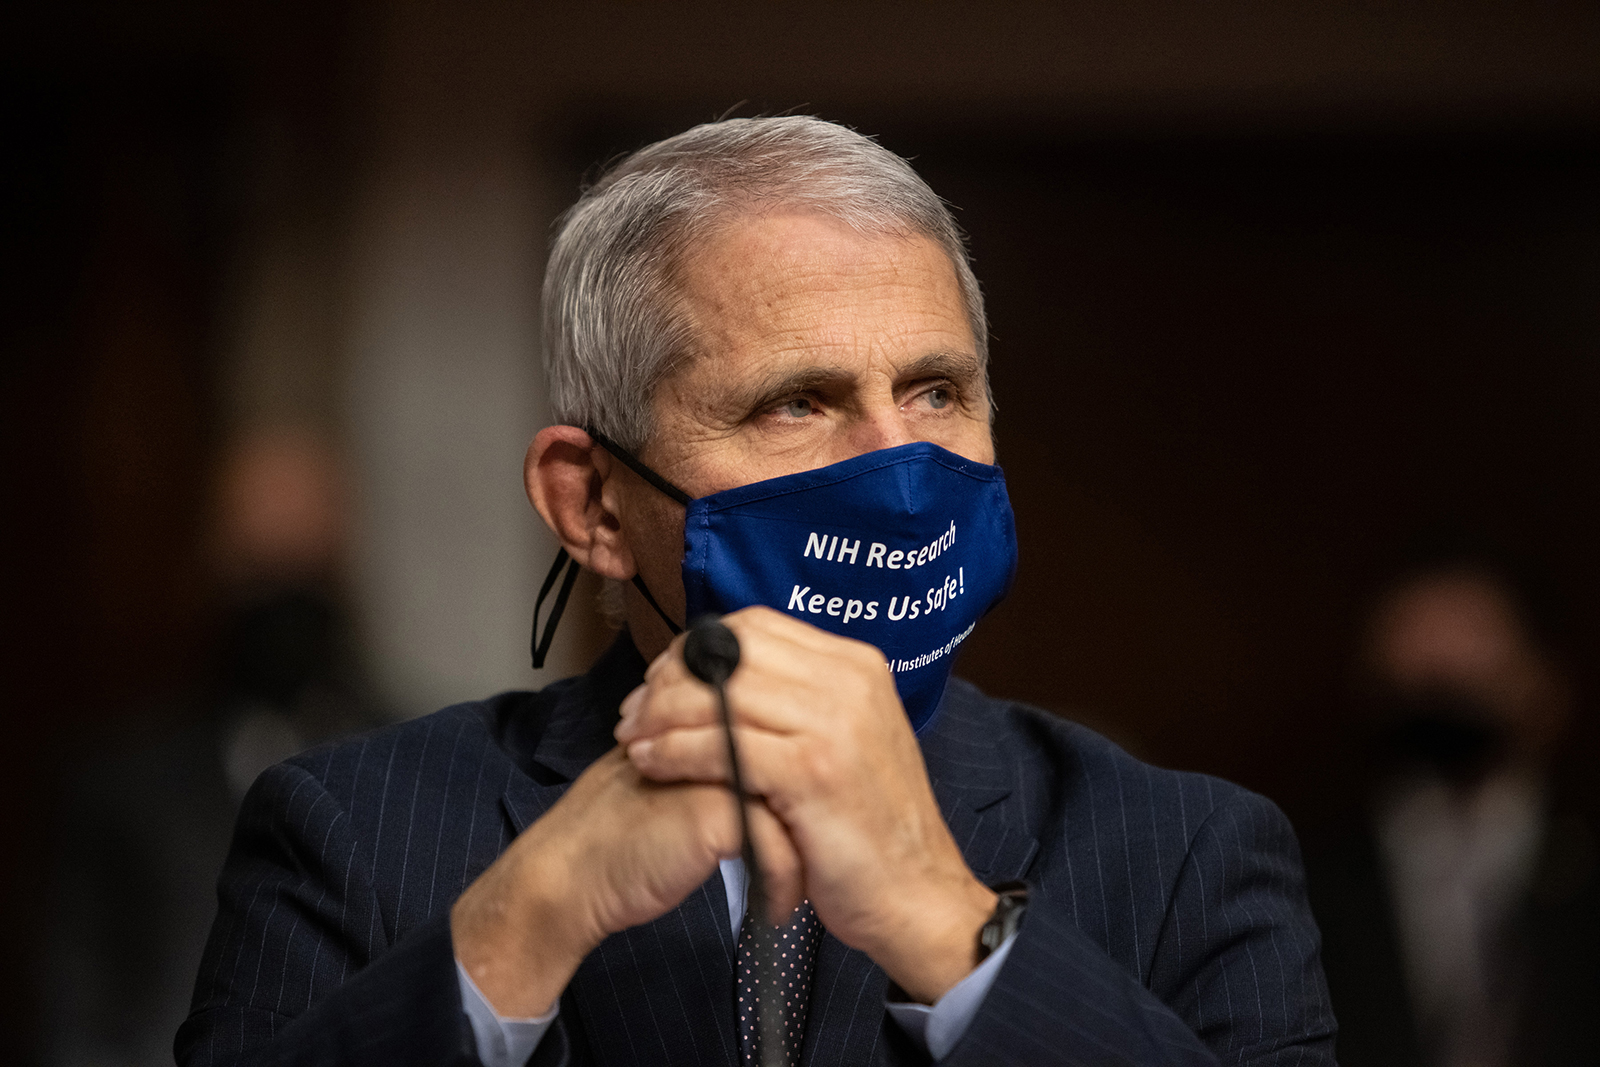 Dr. Anthony Fauci, director of the US National Institute of Allergy and Infectious Disease, prepares to testify during a hearing of US Senate Committee on Health, Education, Labor, and Pensions in Washington, DC, on September 23.